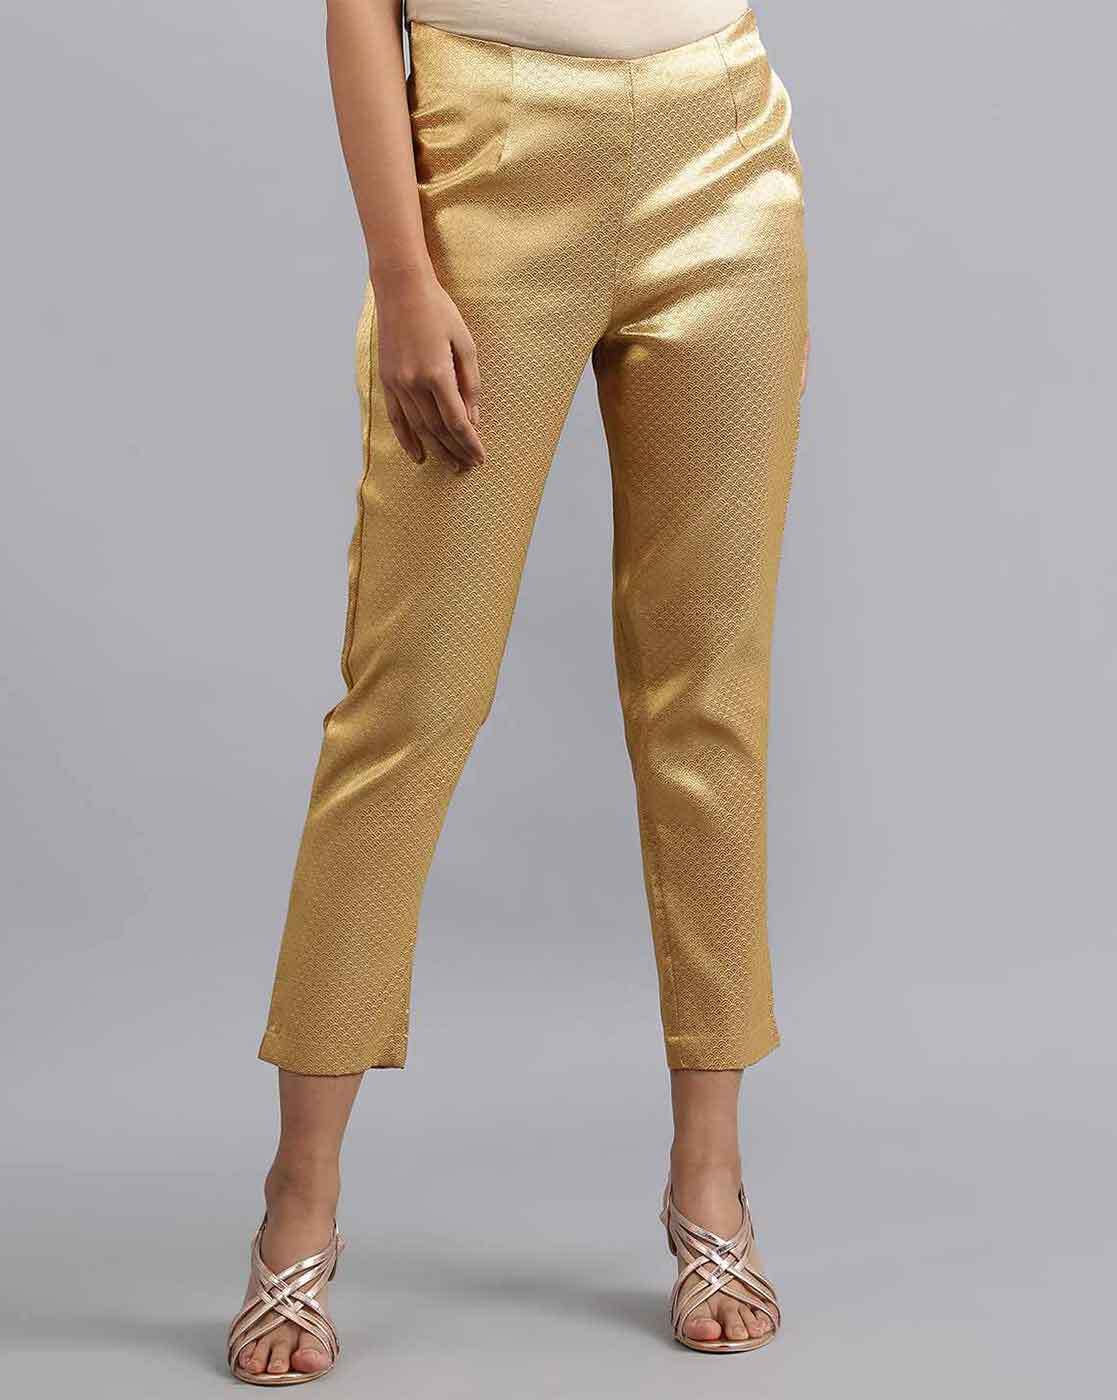 Buy Online Gold Straight Poly Cotton Pants for Women  Girls at Best Prices  in Biba IndiaBOTTOMW175